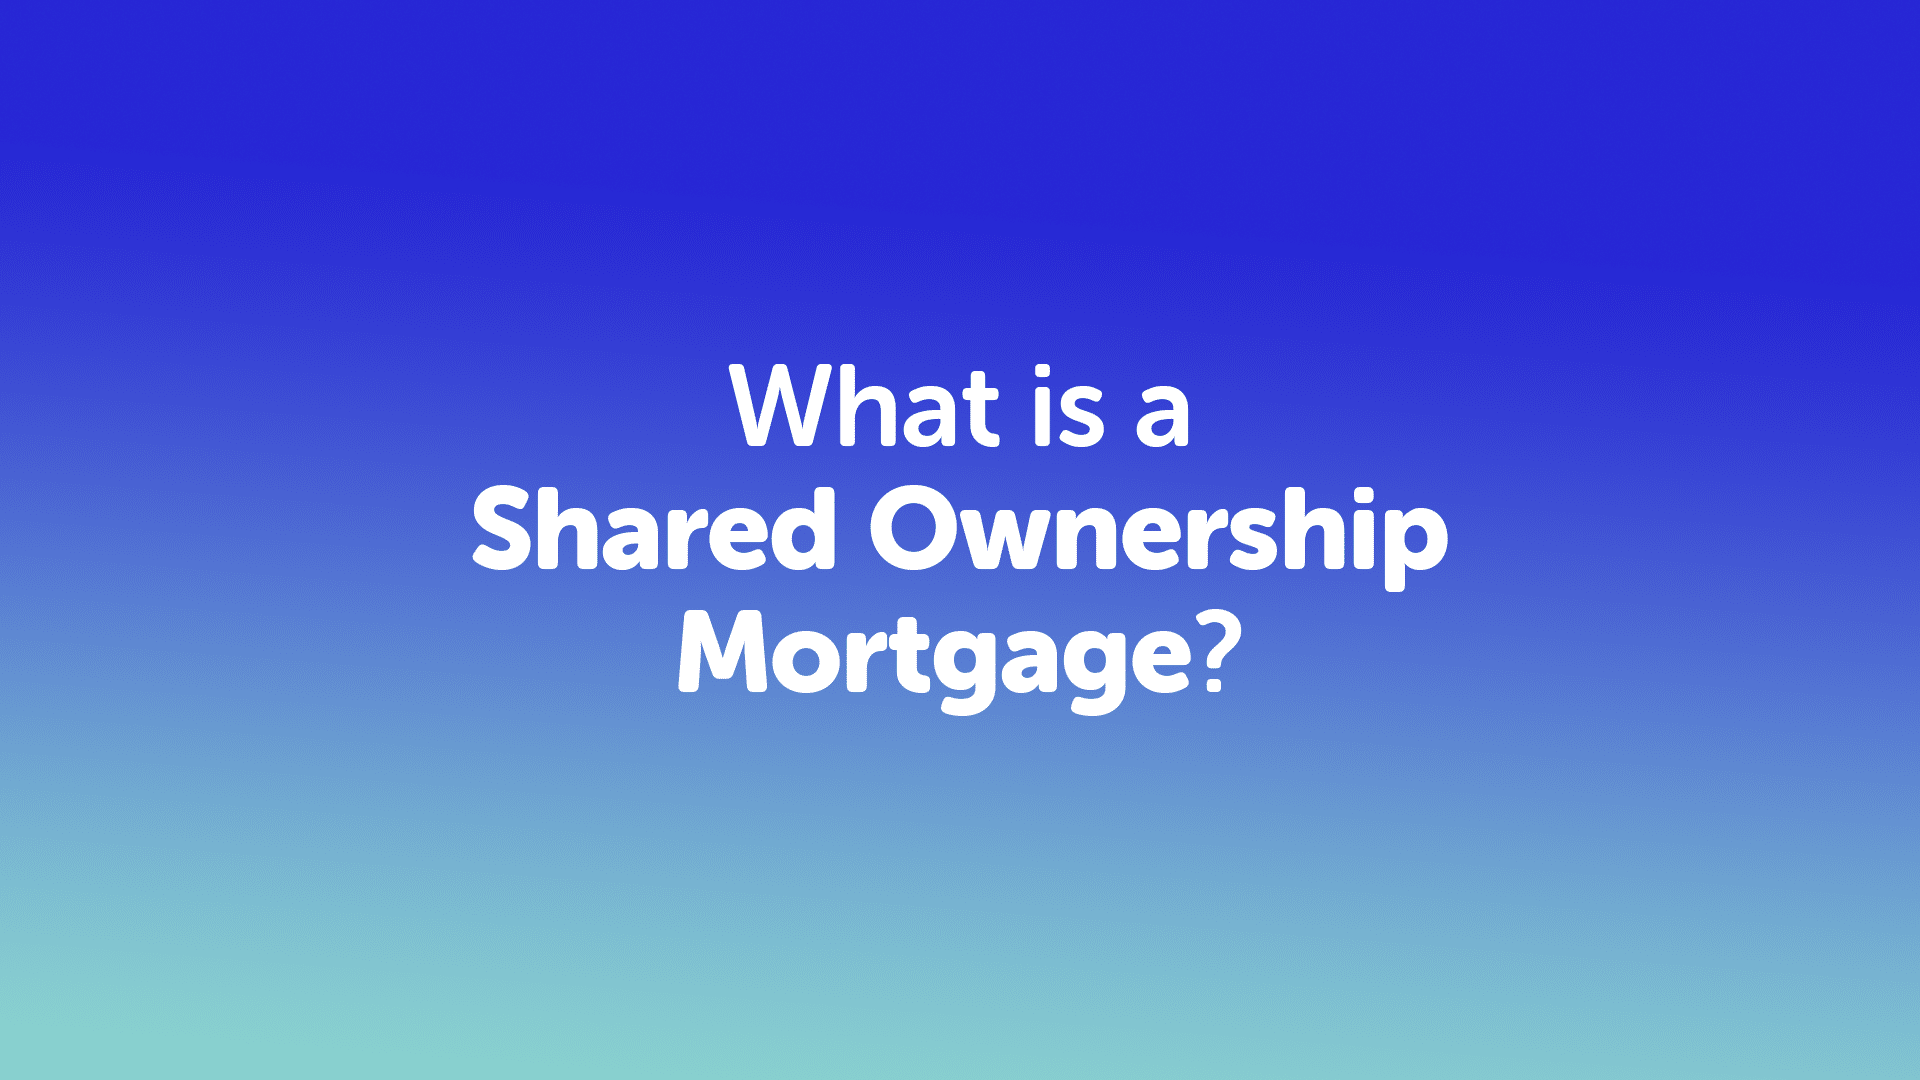 What is a shared ownership mortgage in Leeds?